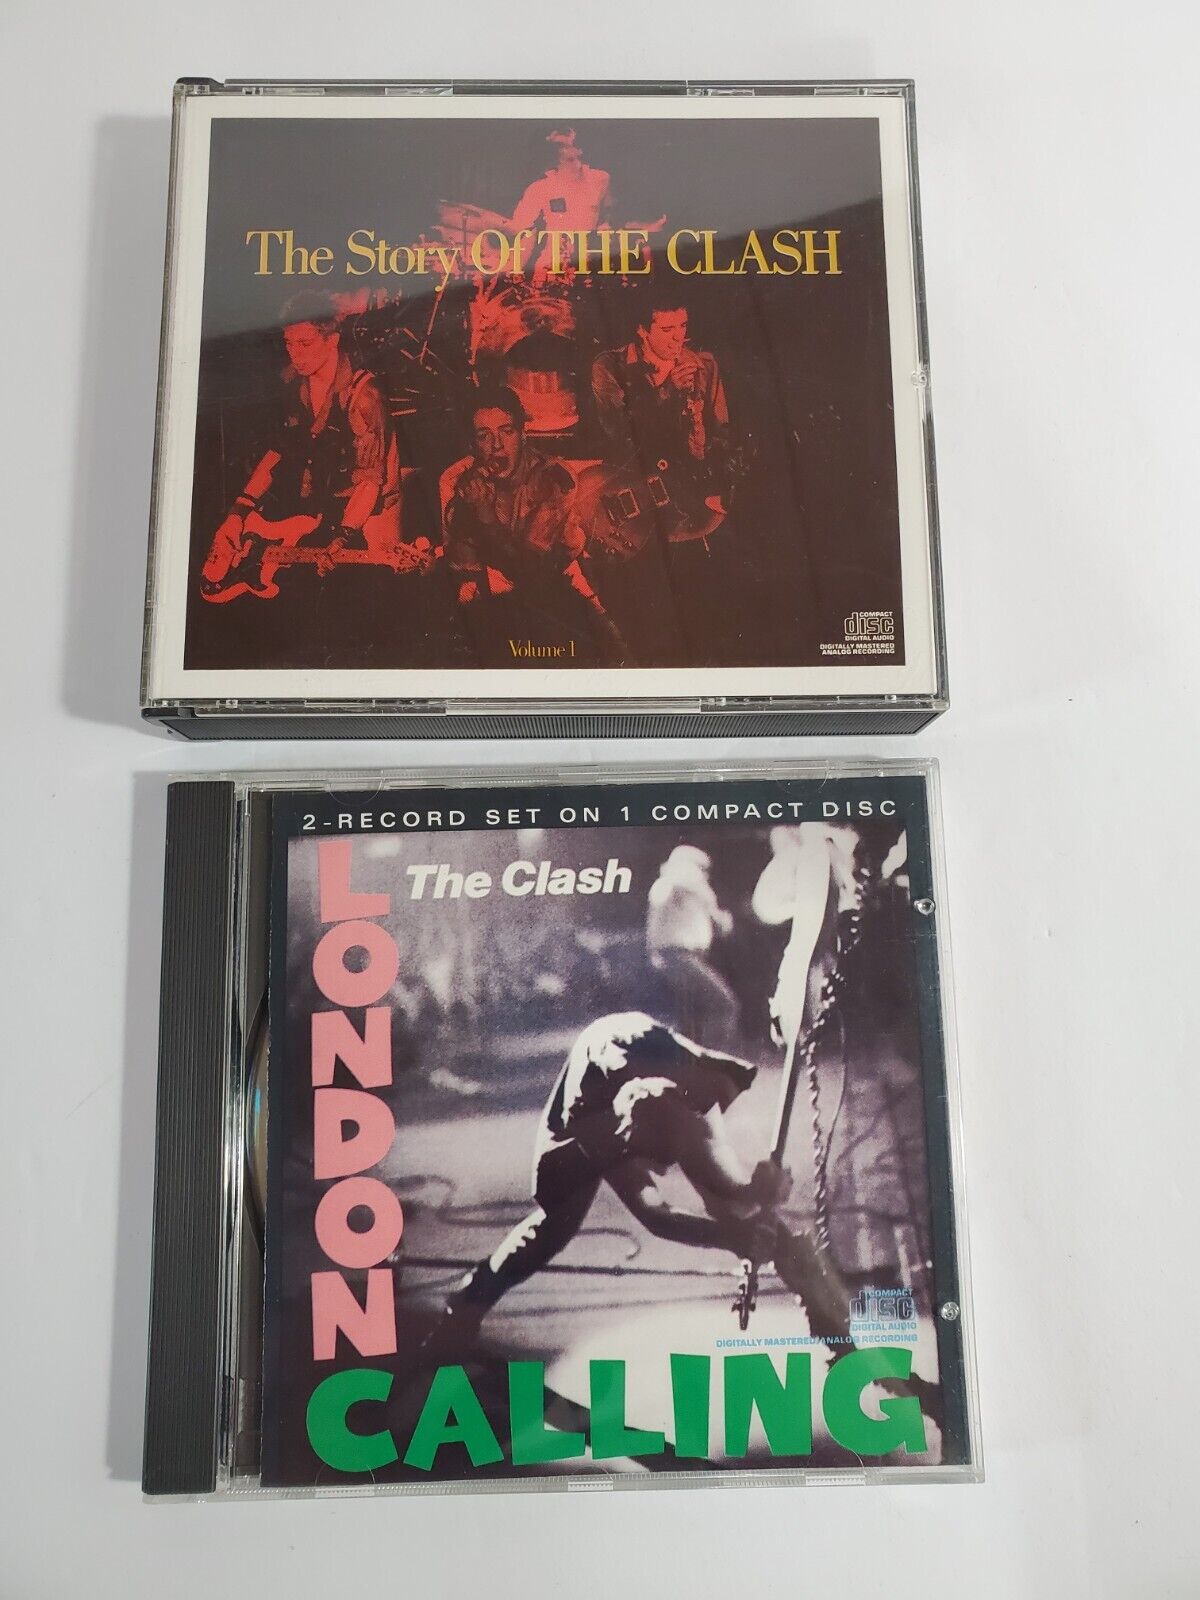 THE CLASH CD Lot - The Story of the Clash, Volume 1 / London Calling